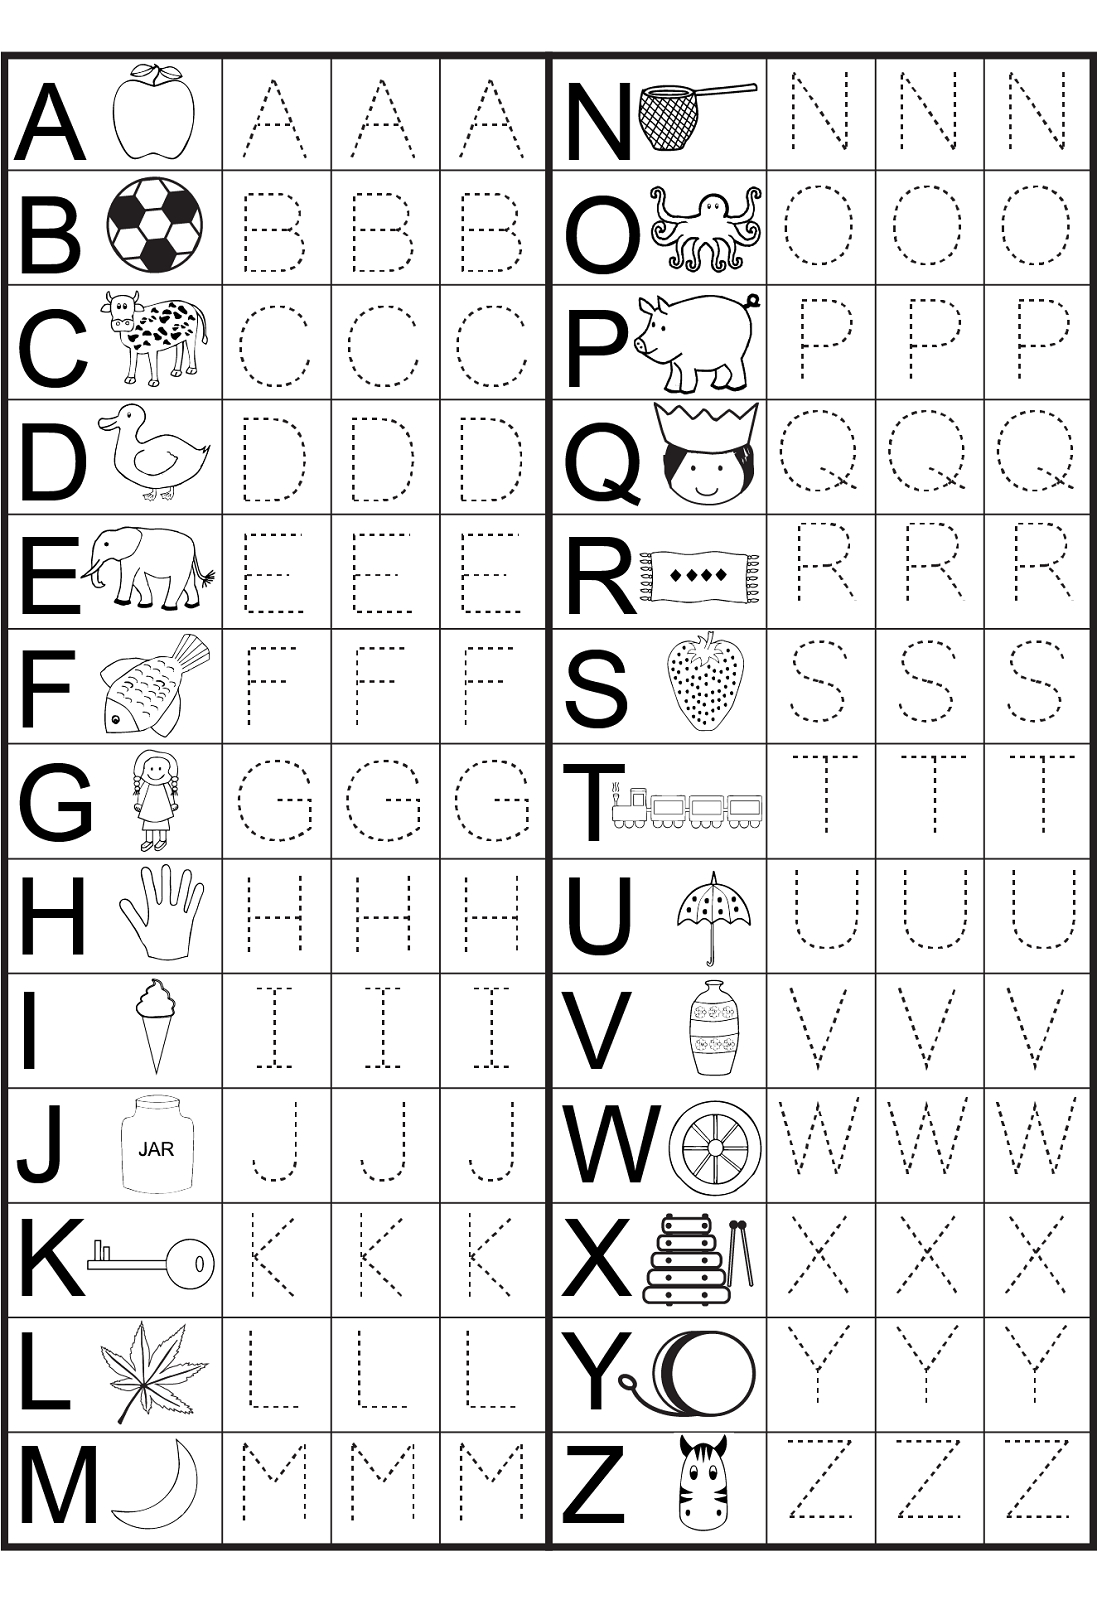 And Sheets Alphabetical Order For Kids Printable Free with regard to Alphabet Order Worksheets For Kindergarten